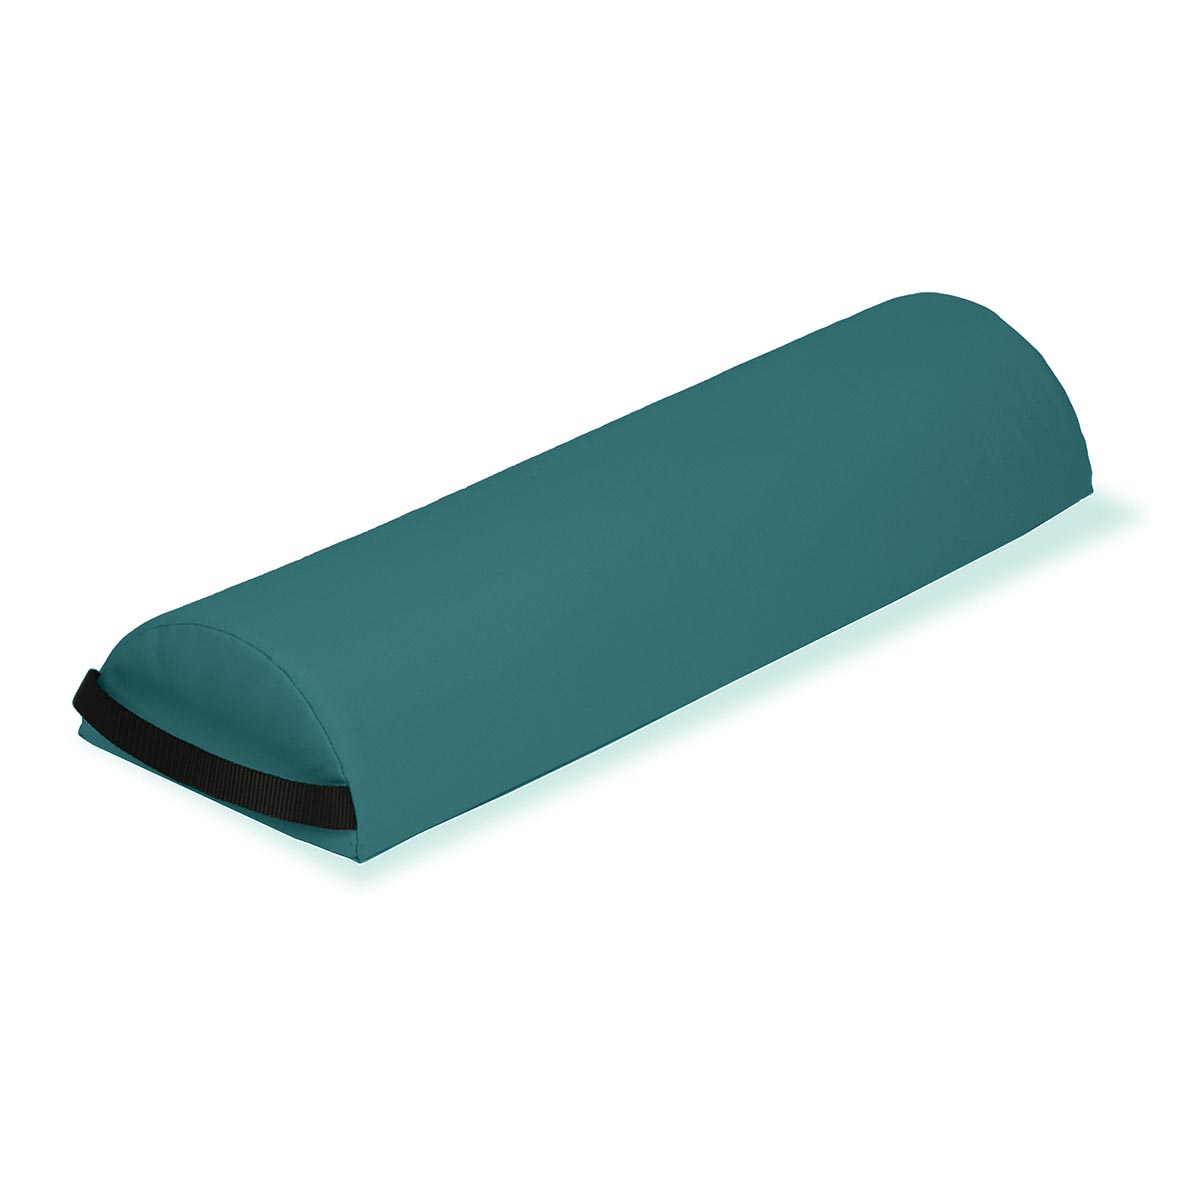 Earthlite Therapy Bolster, Full Round